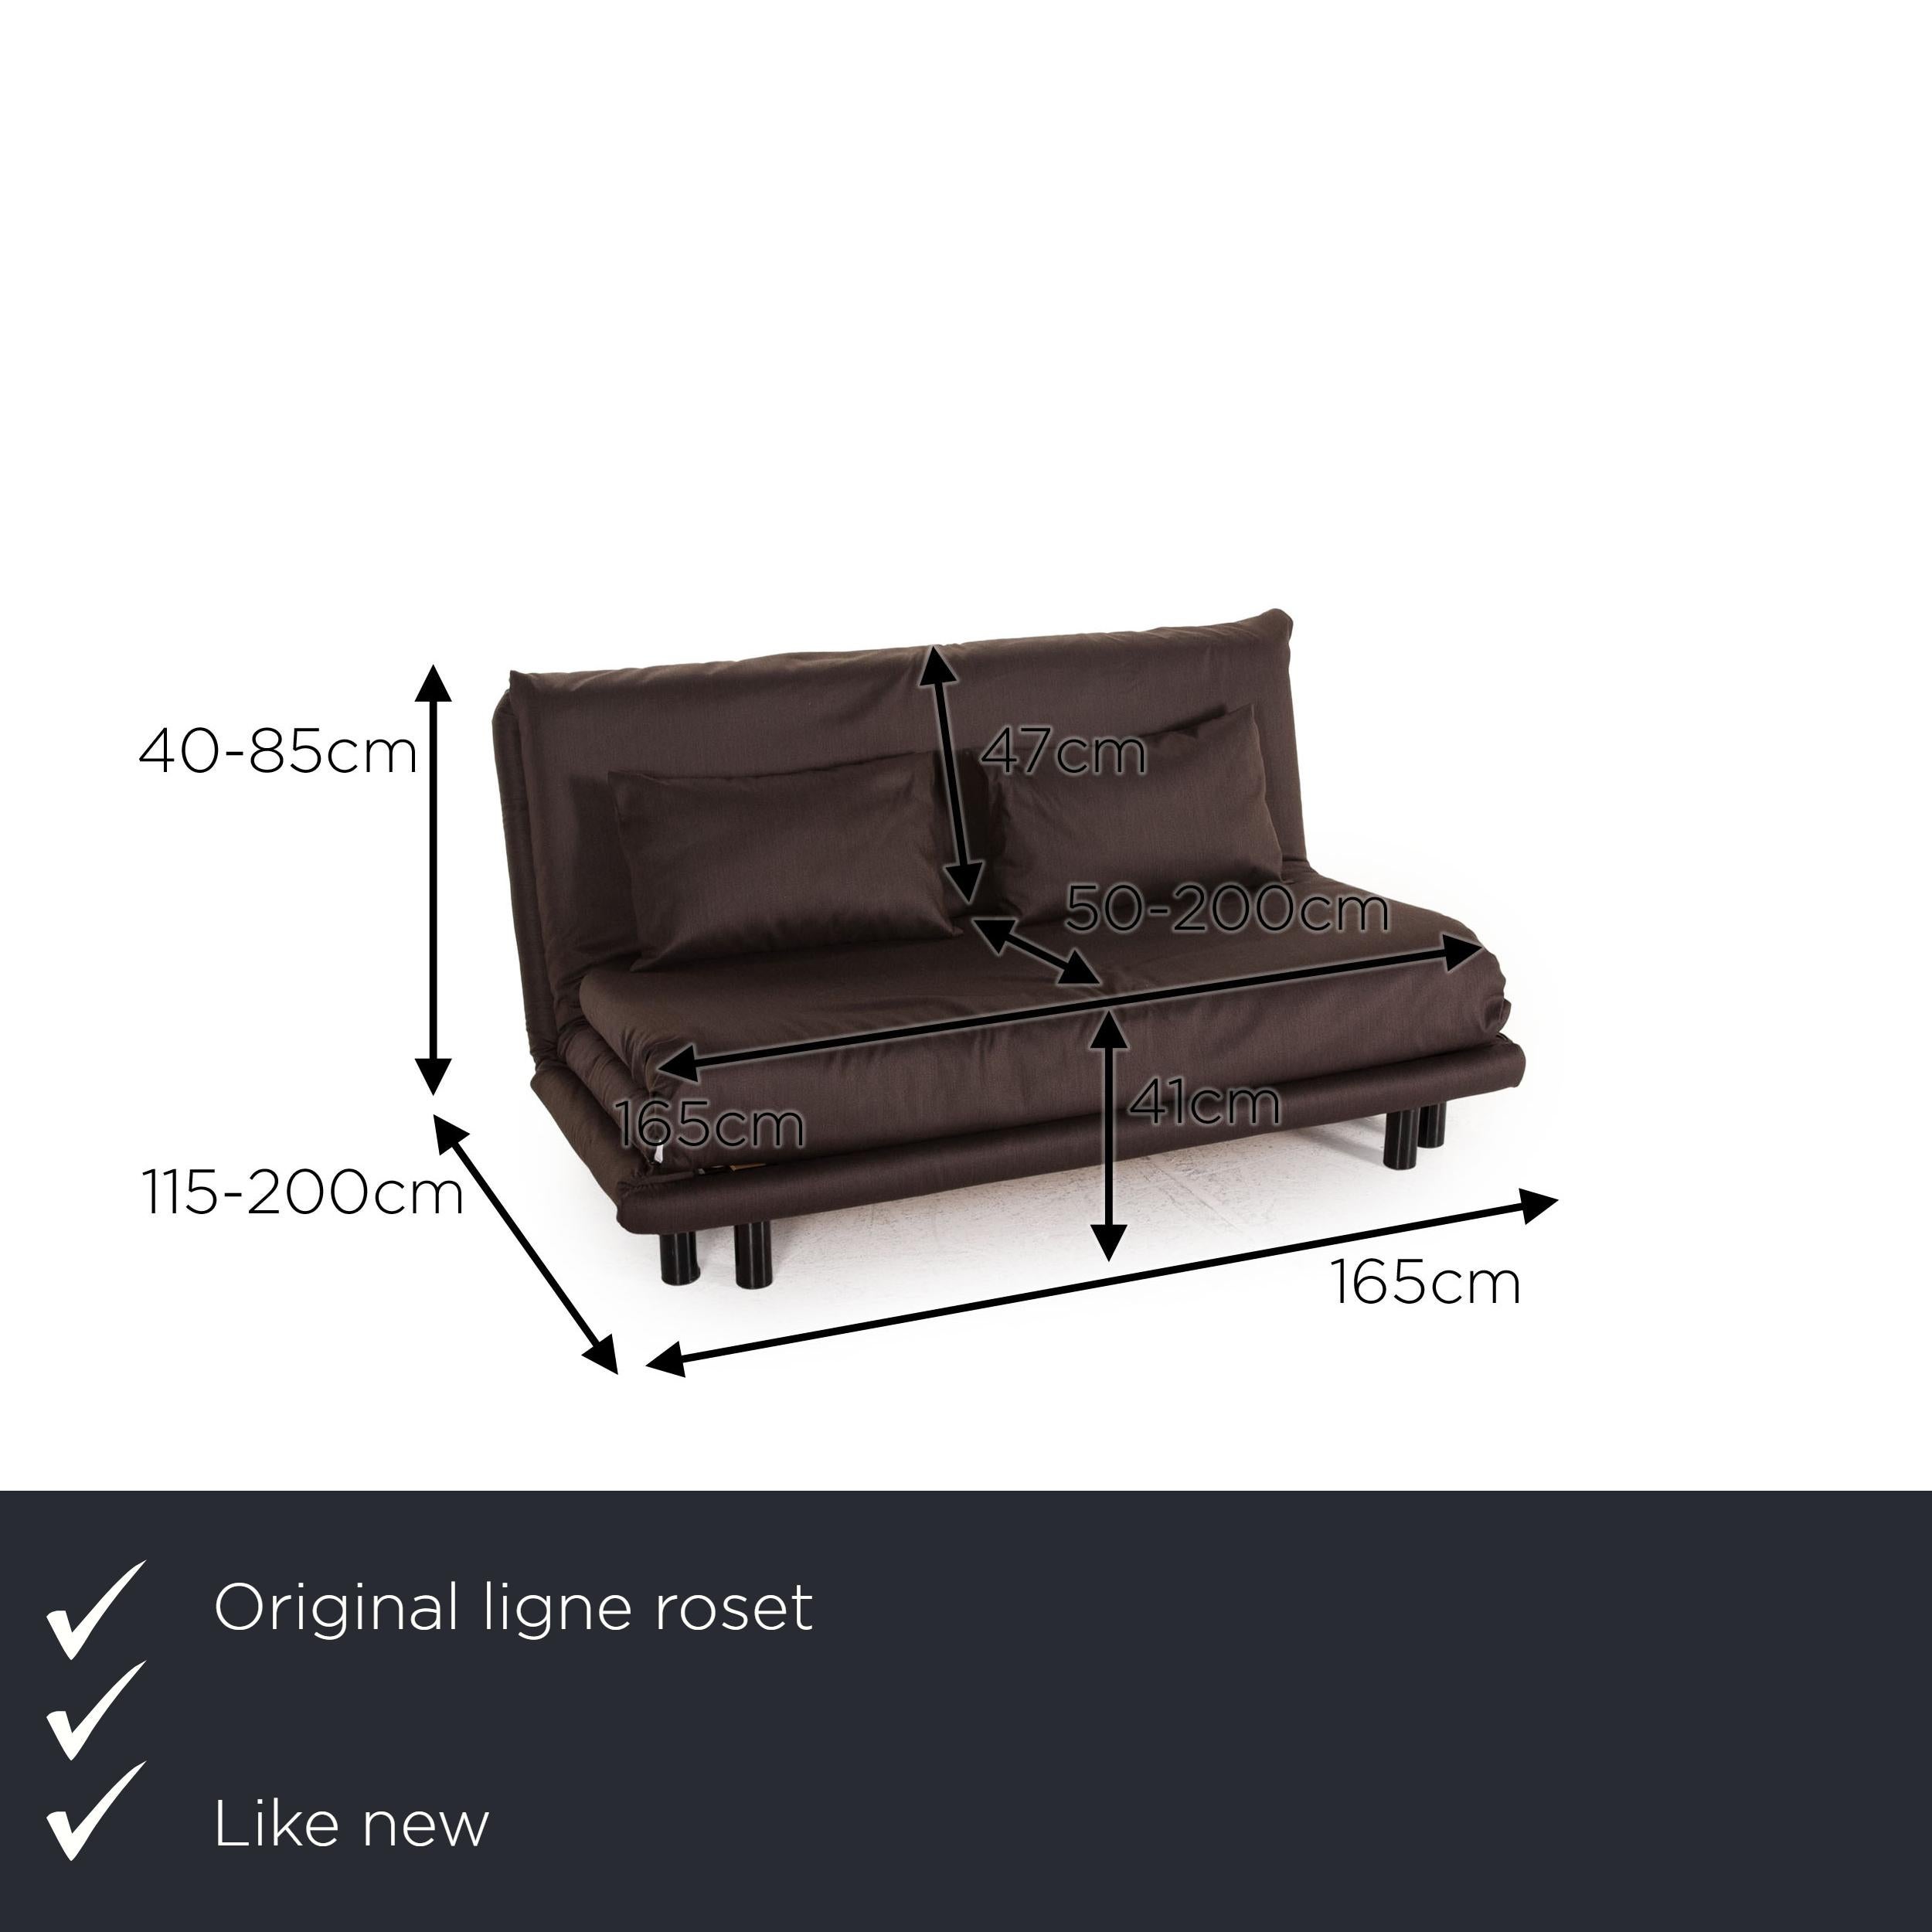 We present to you a ligne roset Multy fabric sofa brown three-seater function sleeping function.

Product measurements in centimeters:

depth: 115
width: 165
height: 40
seat height: 41
seat depth: 50
seat width: 165
back height: 47.


 